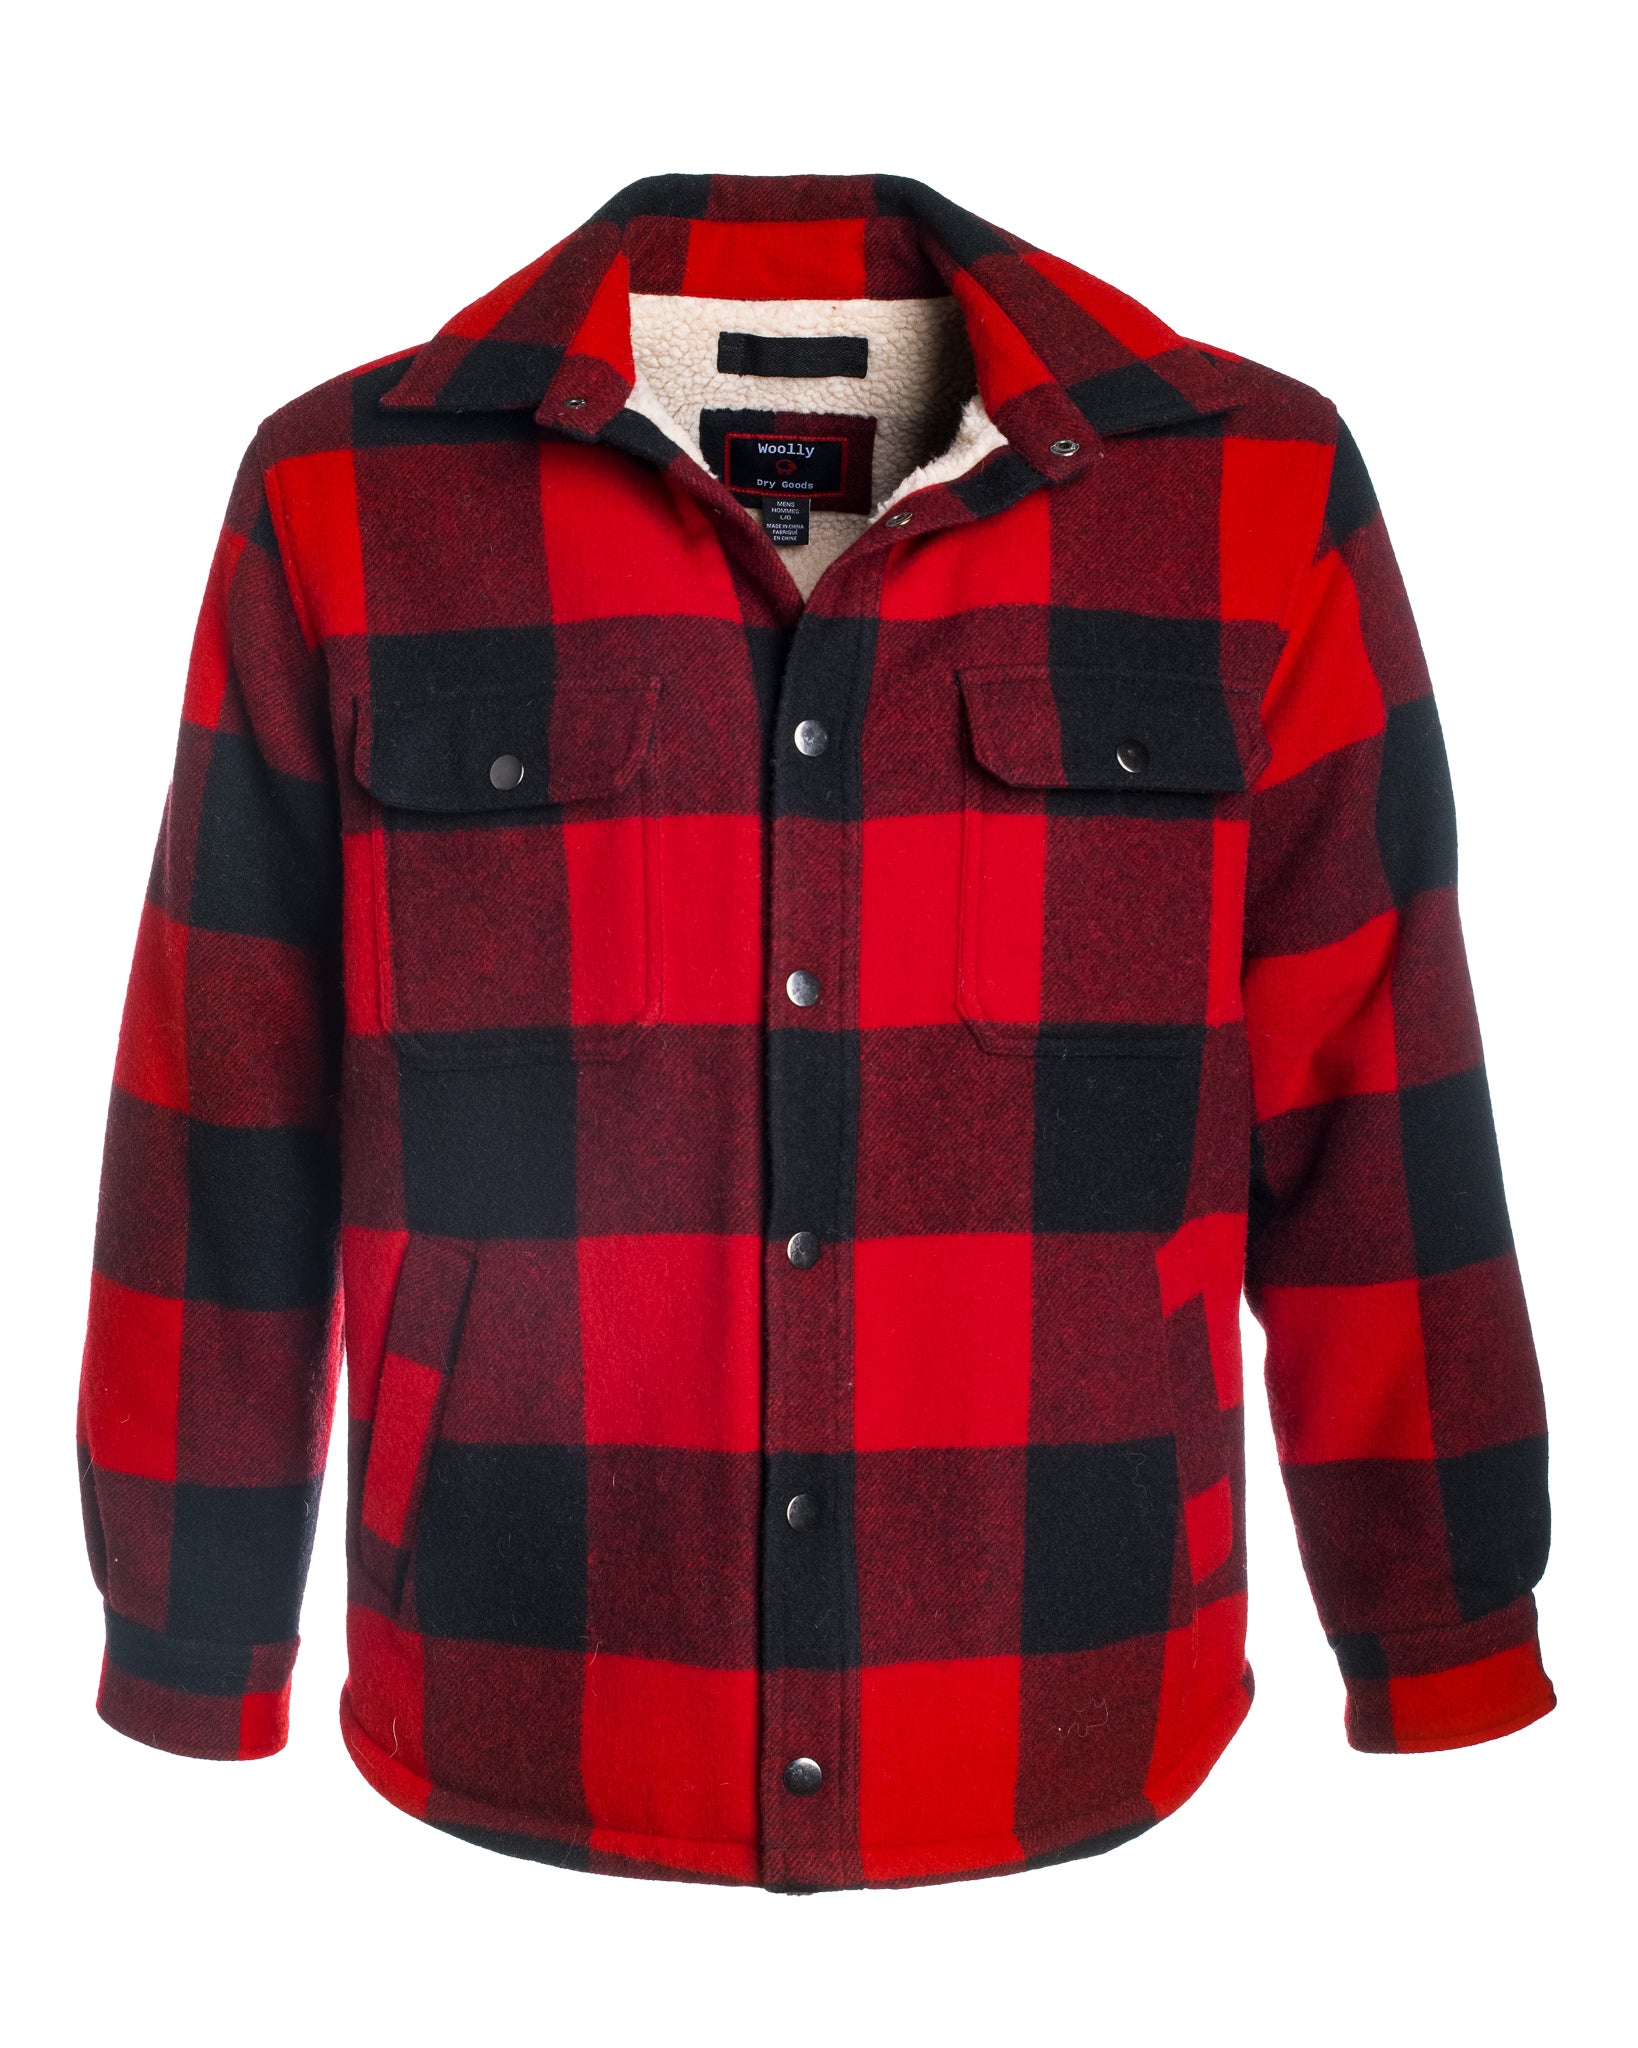 Sherpa Lined Shirtjac Woolly Dry Goods